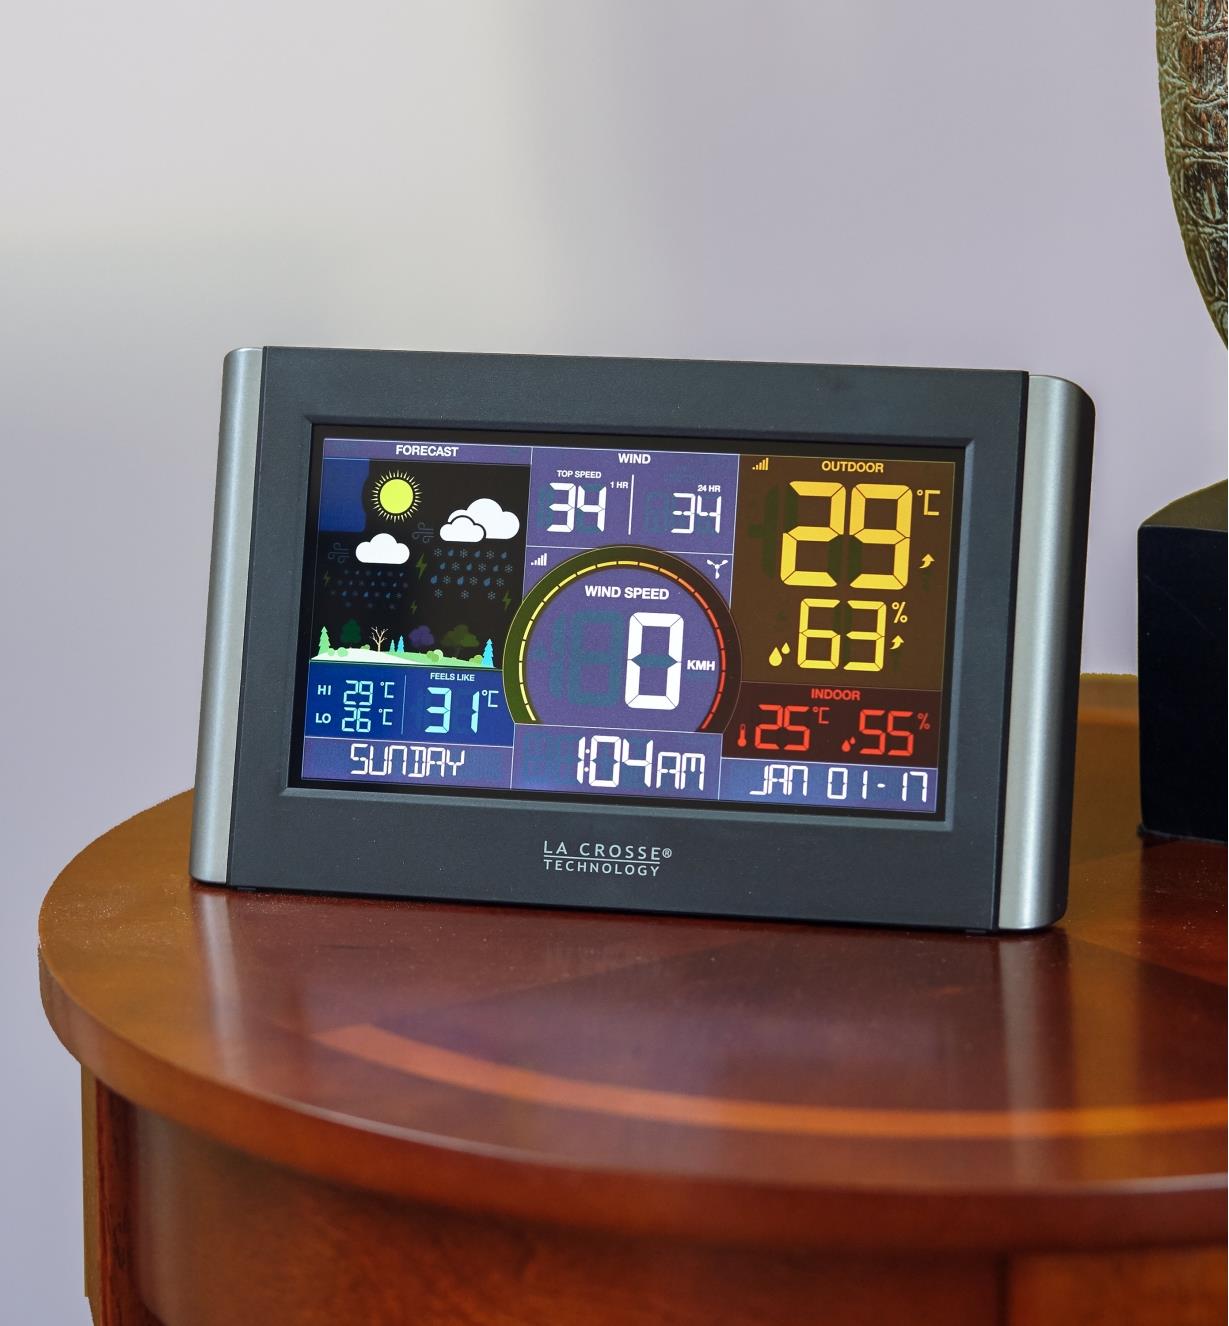 The display unit of the Wi-Fi weather station with wind sits on a tabletop